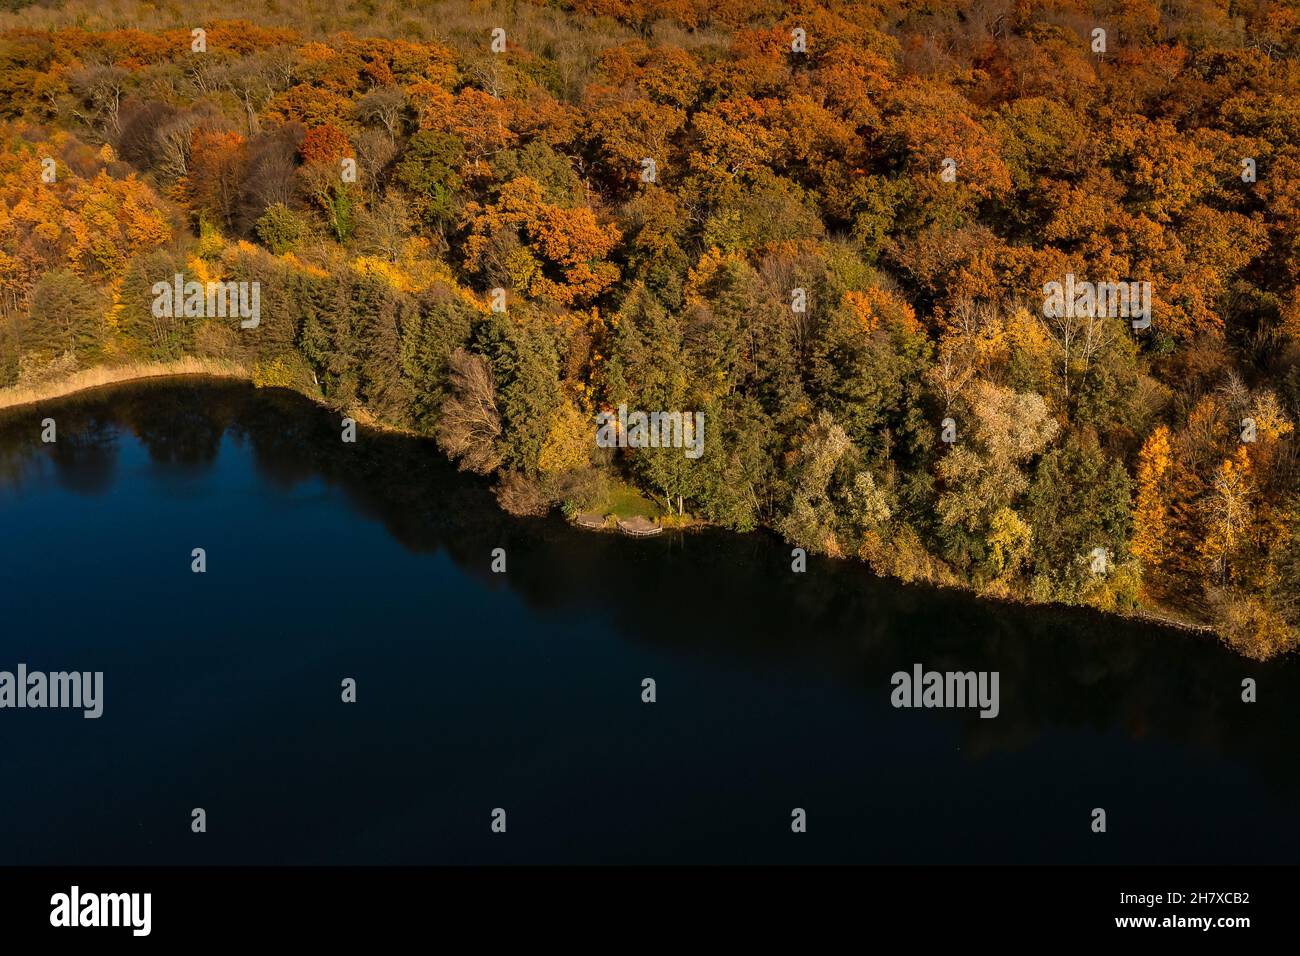 Aerial view of an autumn colored forest on a bank to a blue lake Stock Photo